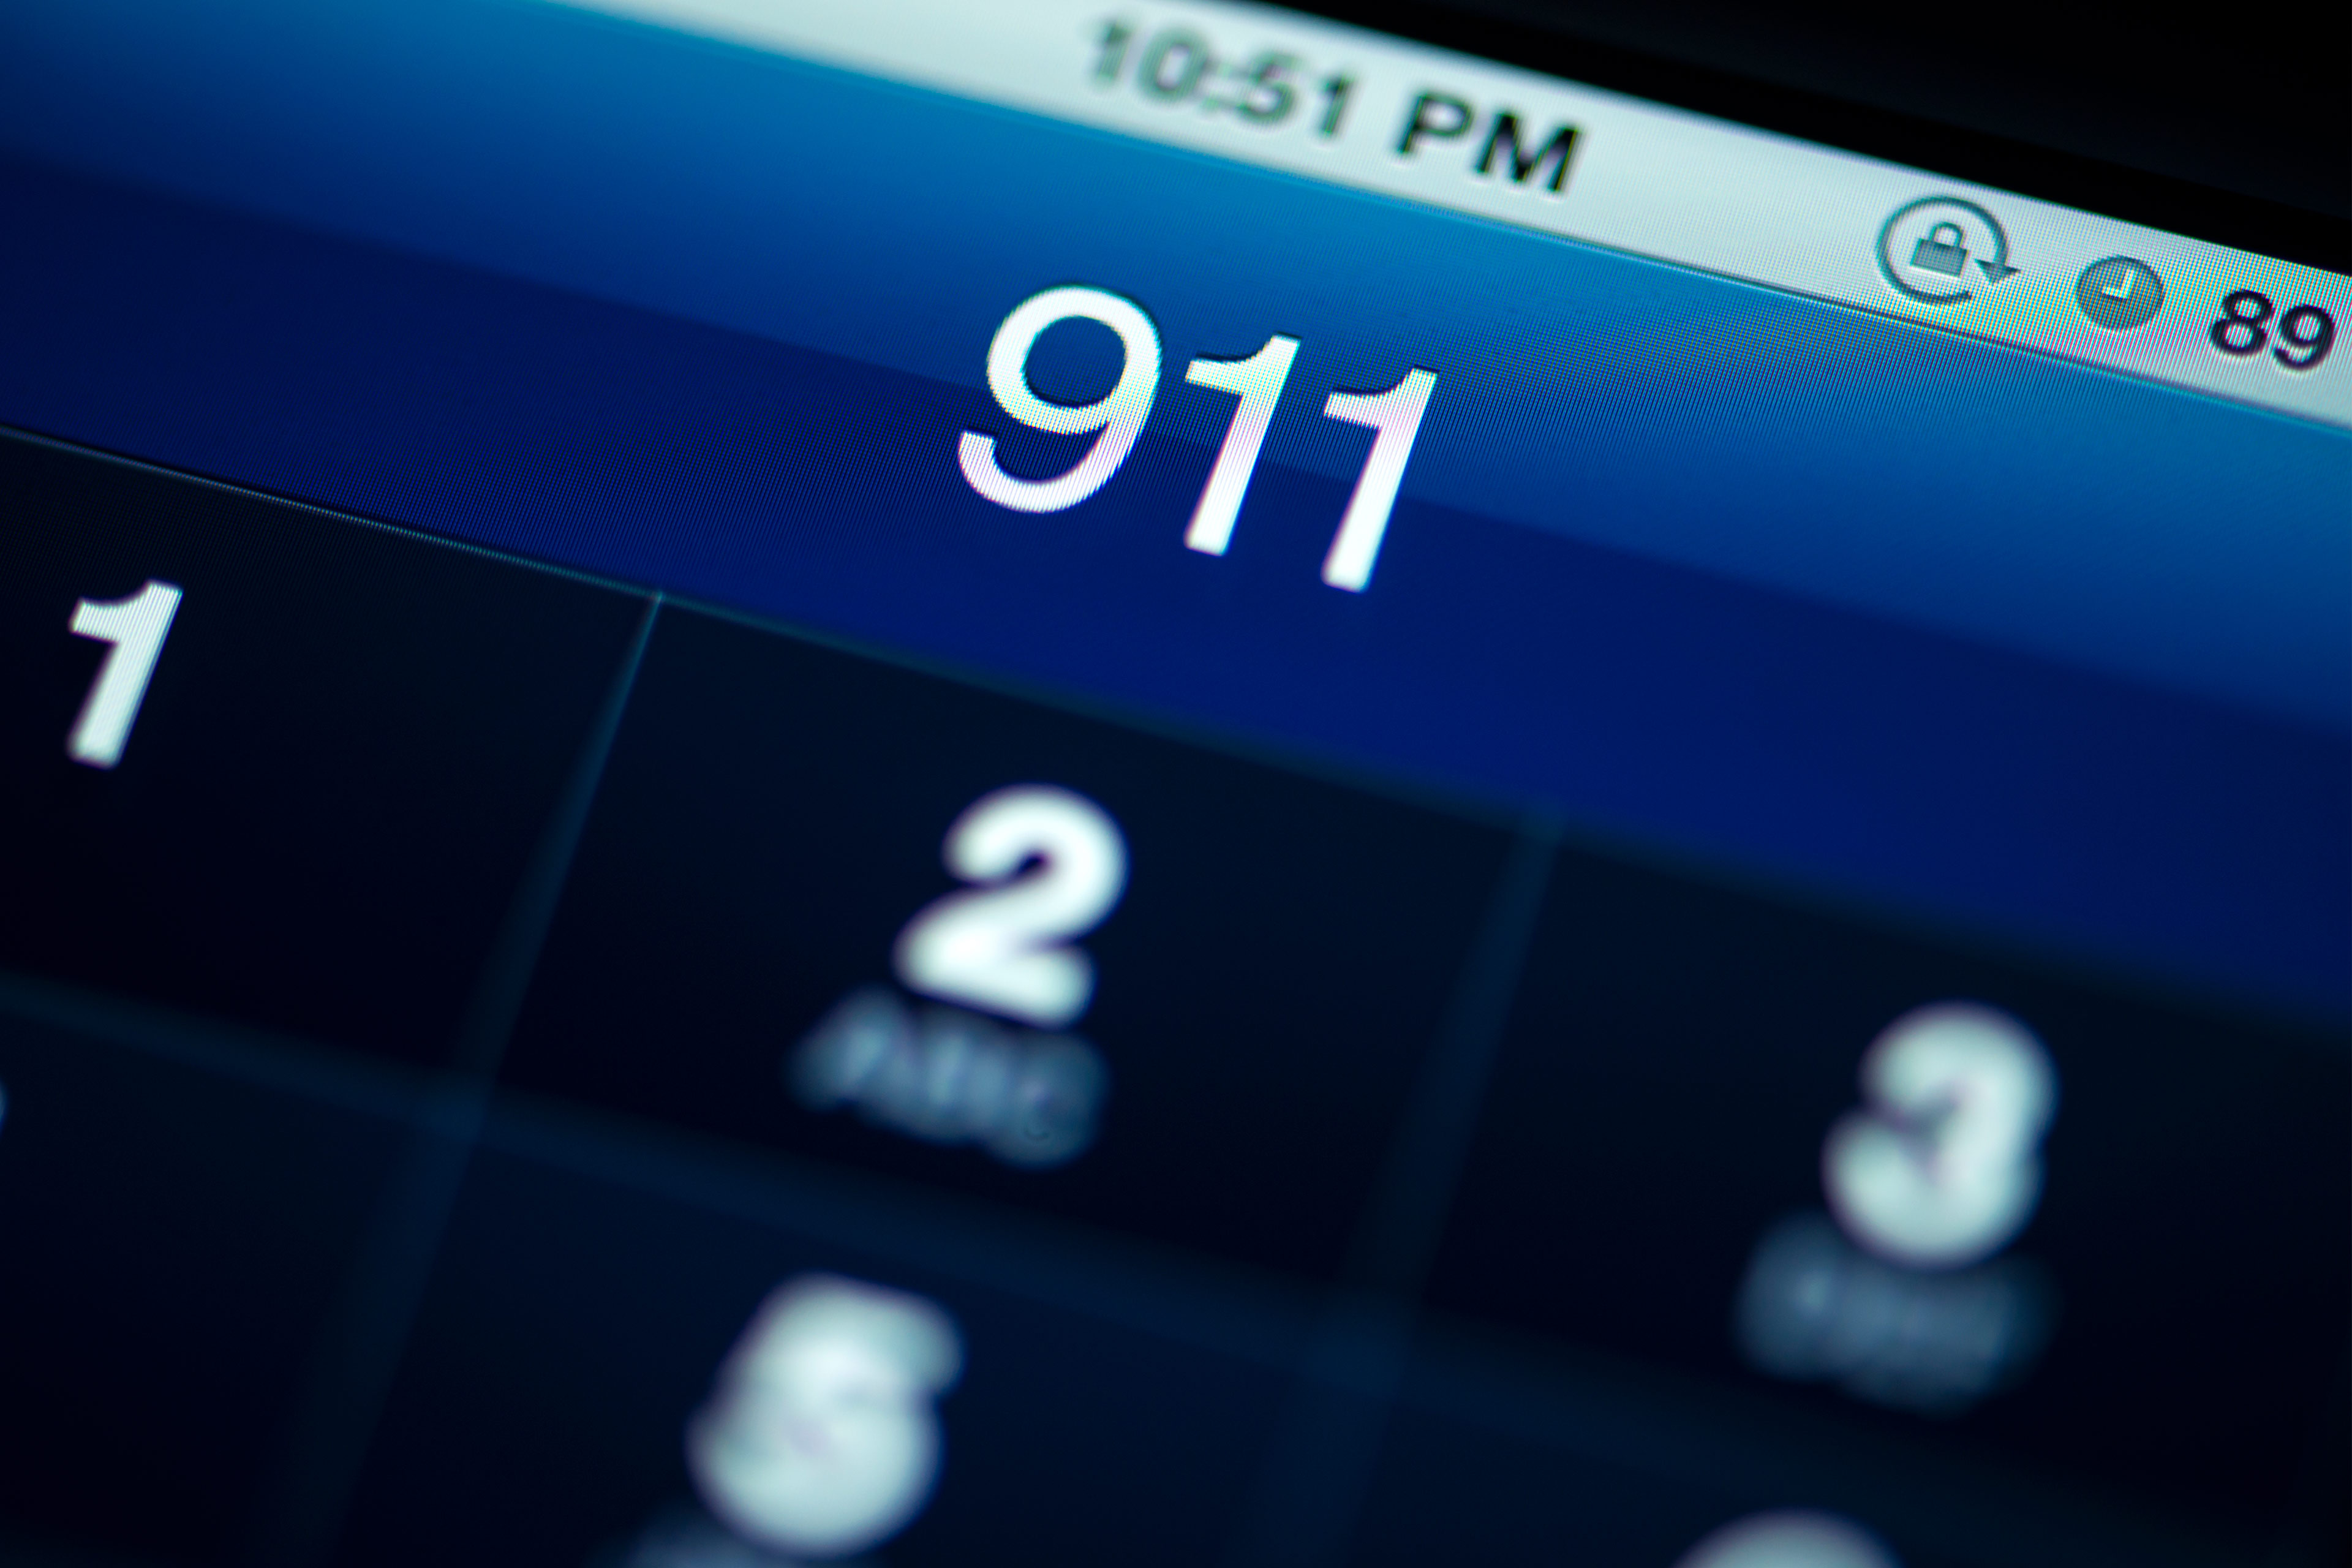 Advocates Call for 911 Changes. Police Have Mixed Feelings.